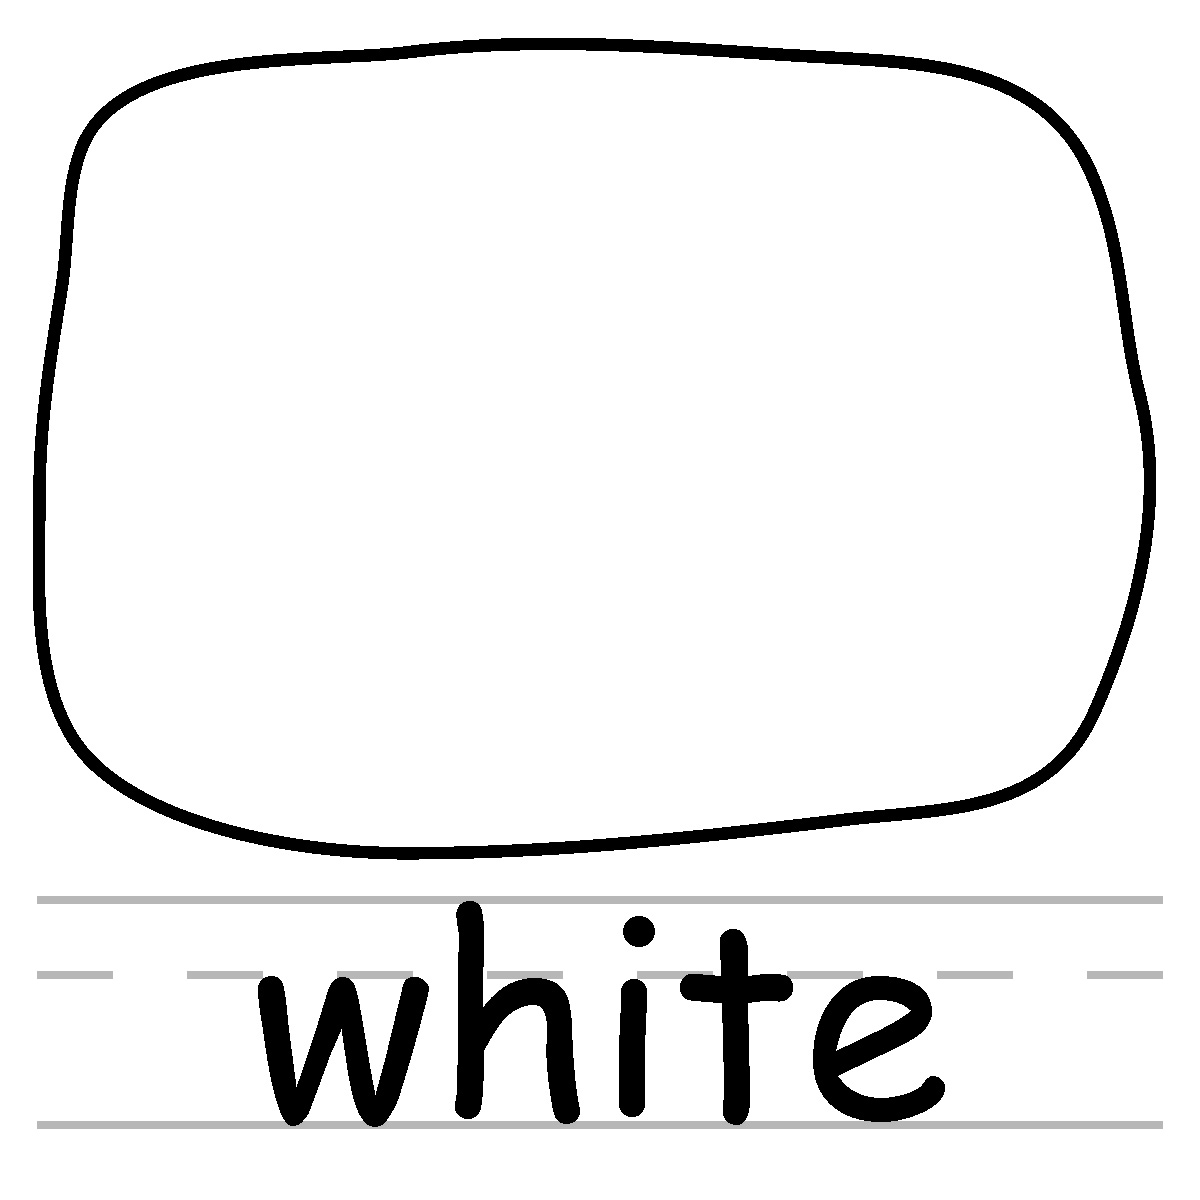 free black and white educational clip art - photo #35